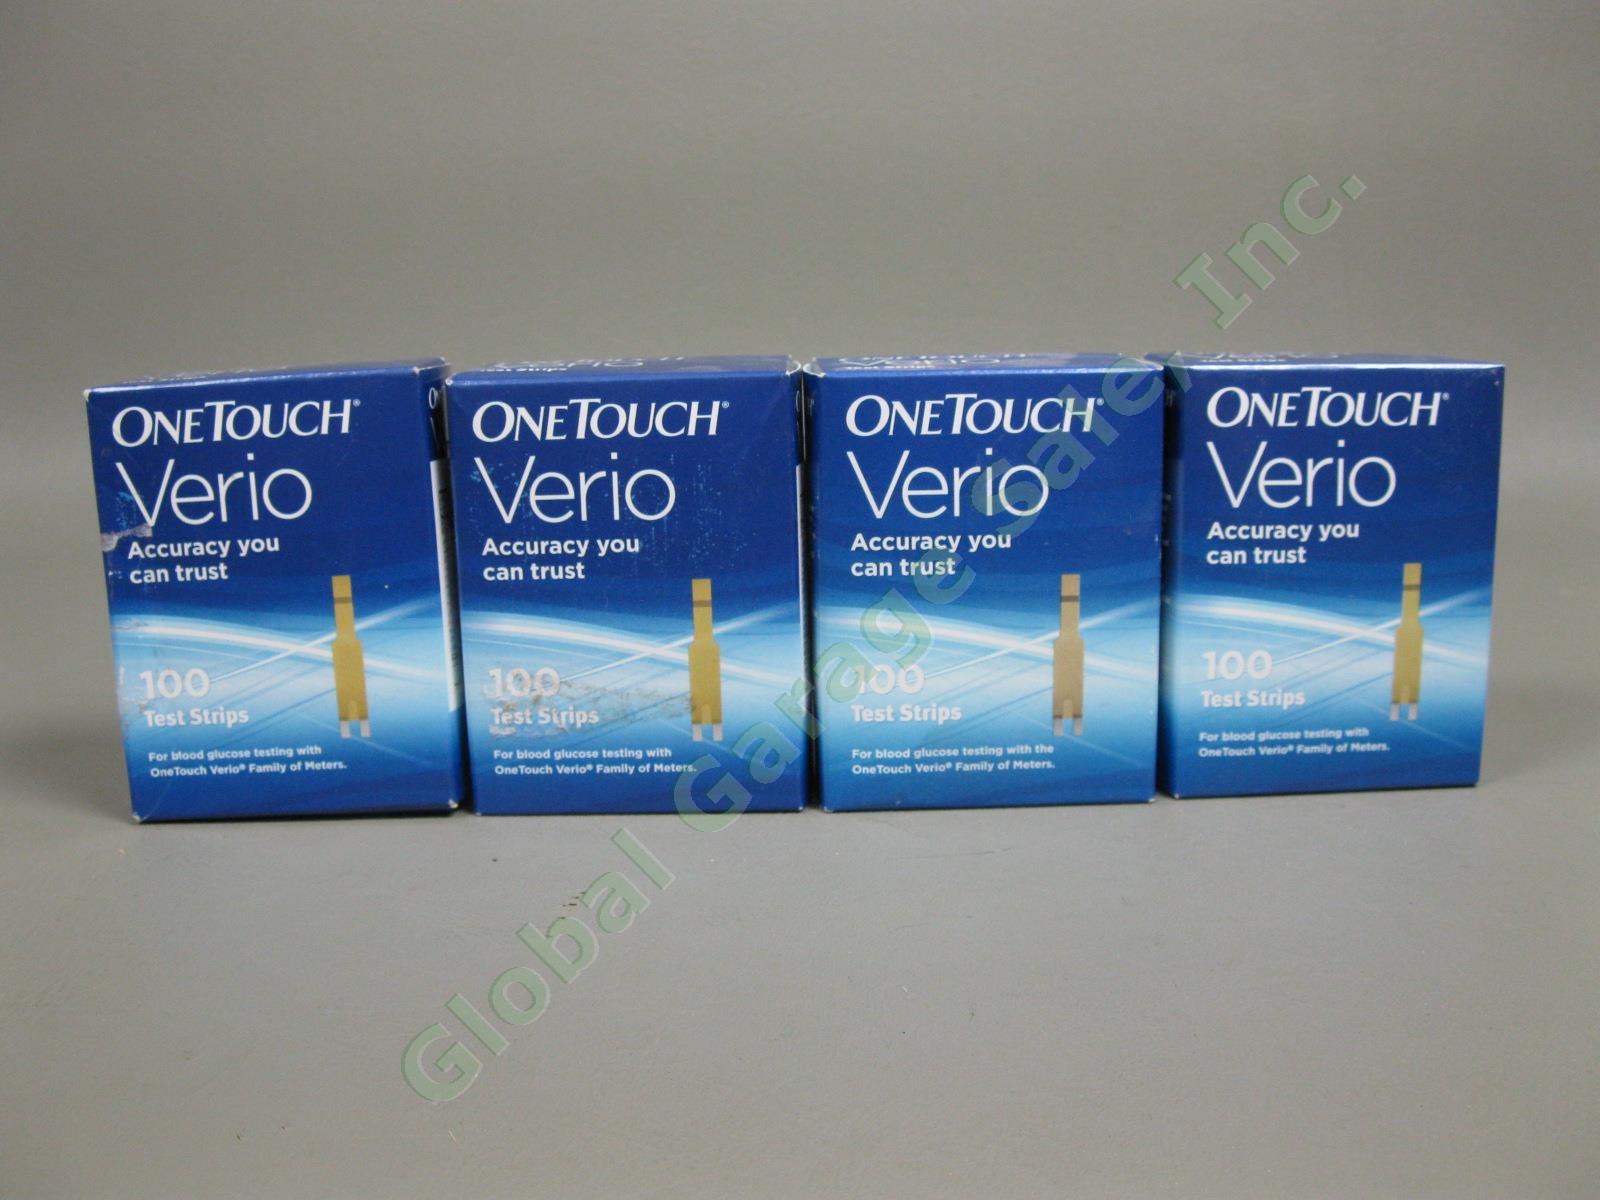 1100 NEW OneTouch Verio Diabetic Glucose Test Strips Sealed Lot Exp 2018-2019 NR 5